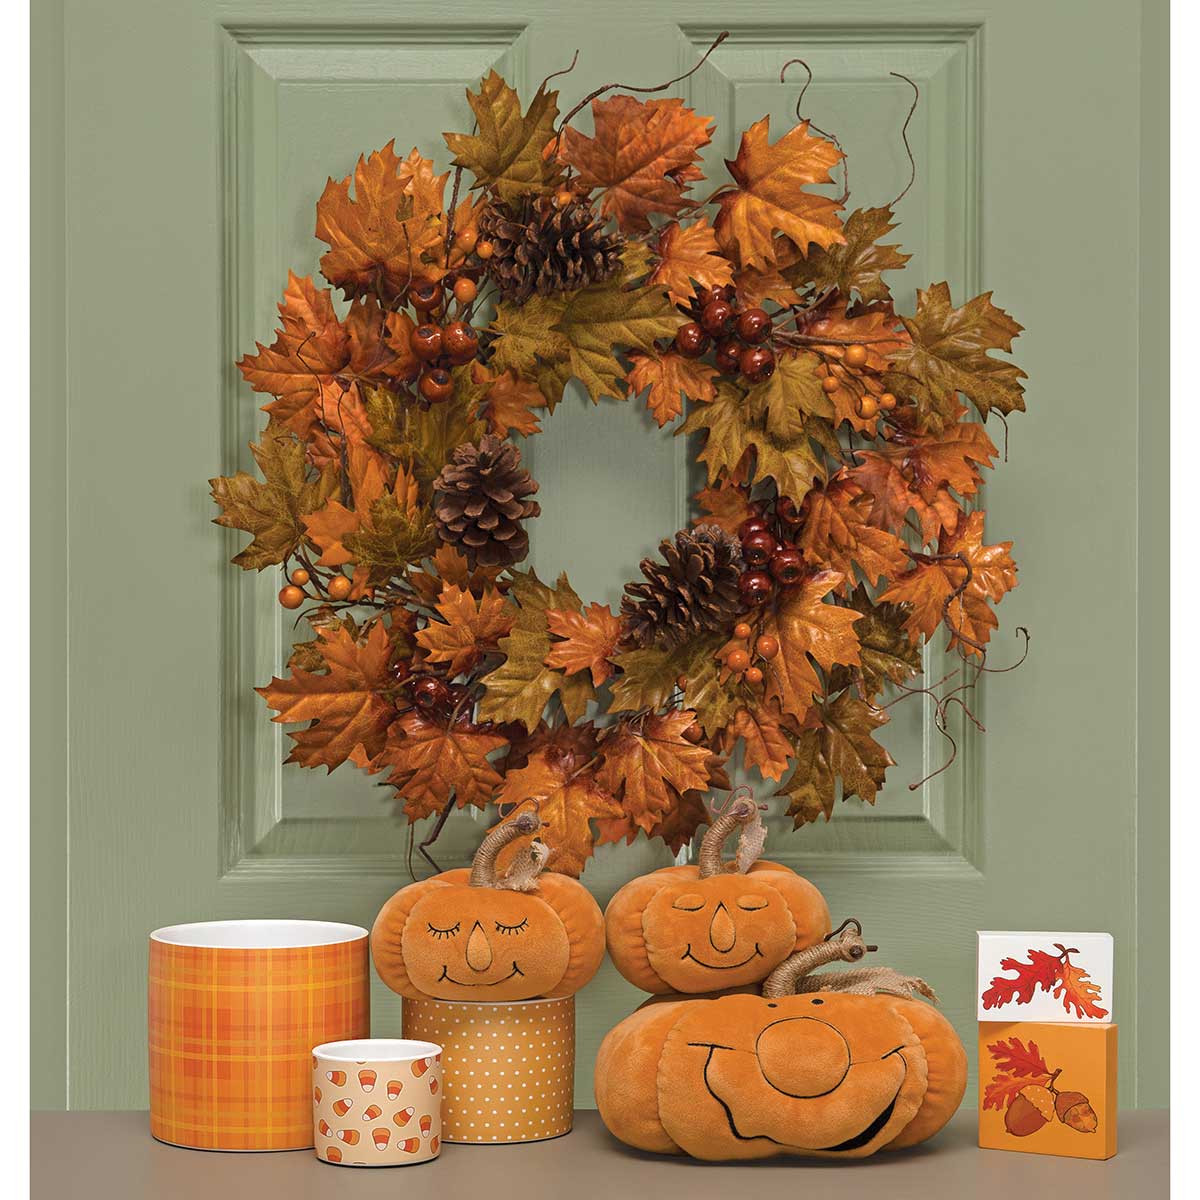 WREATH MAPLE LEAF WITH PINECONES 24IN (INNER RING 9.5IN) - Click Image to Close